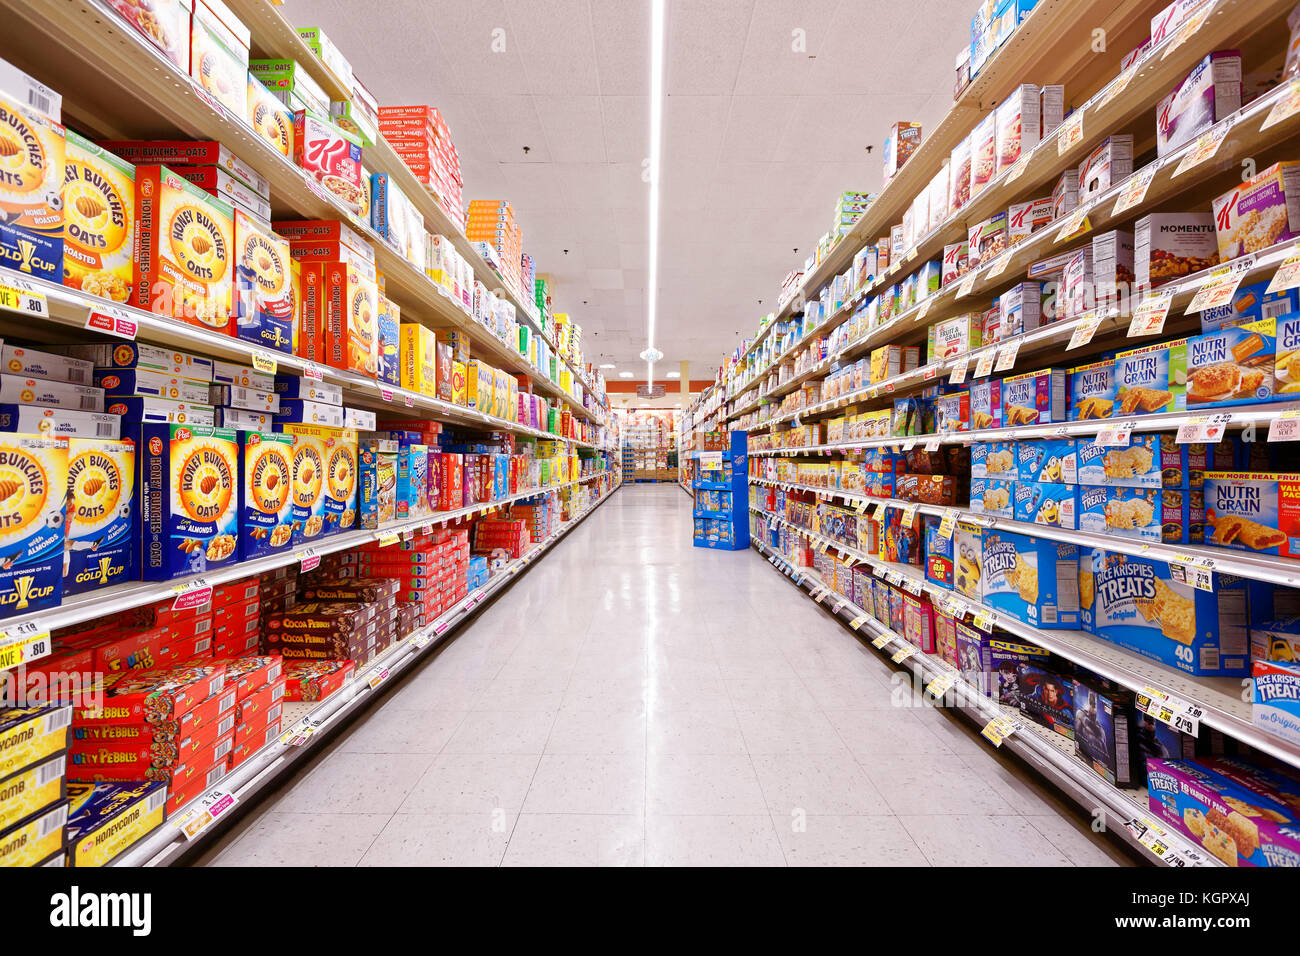 A typical food store or supermarket in the USA Stock Photo